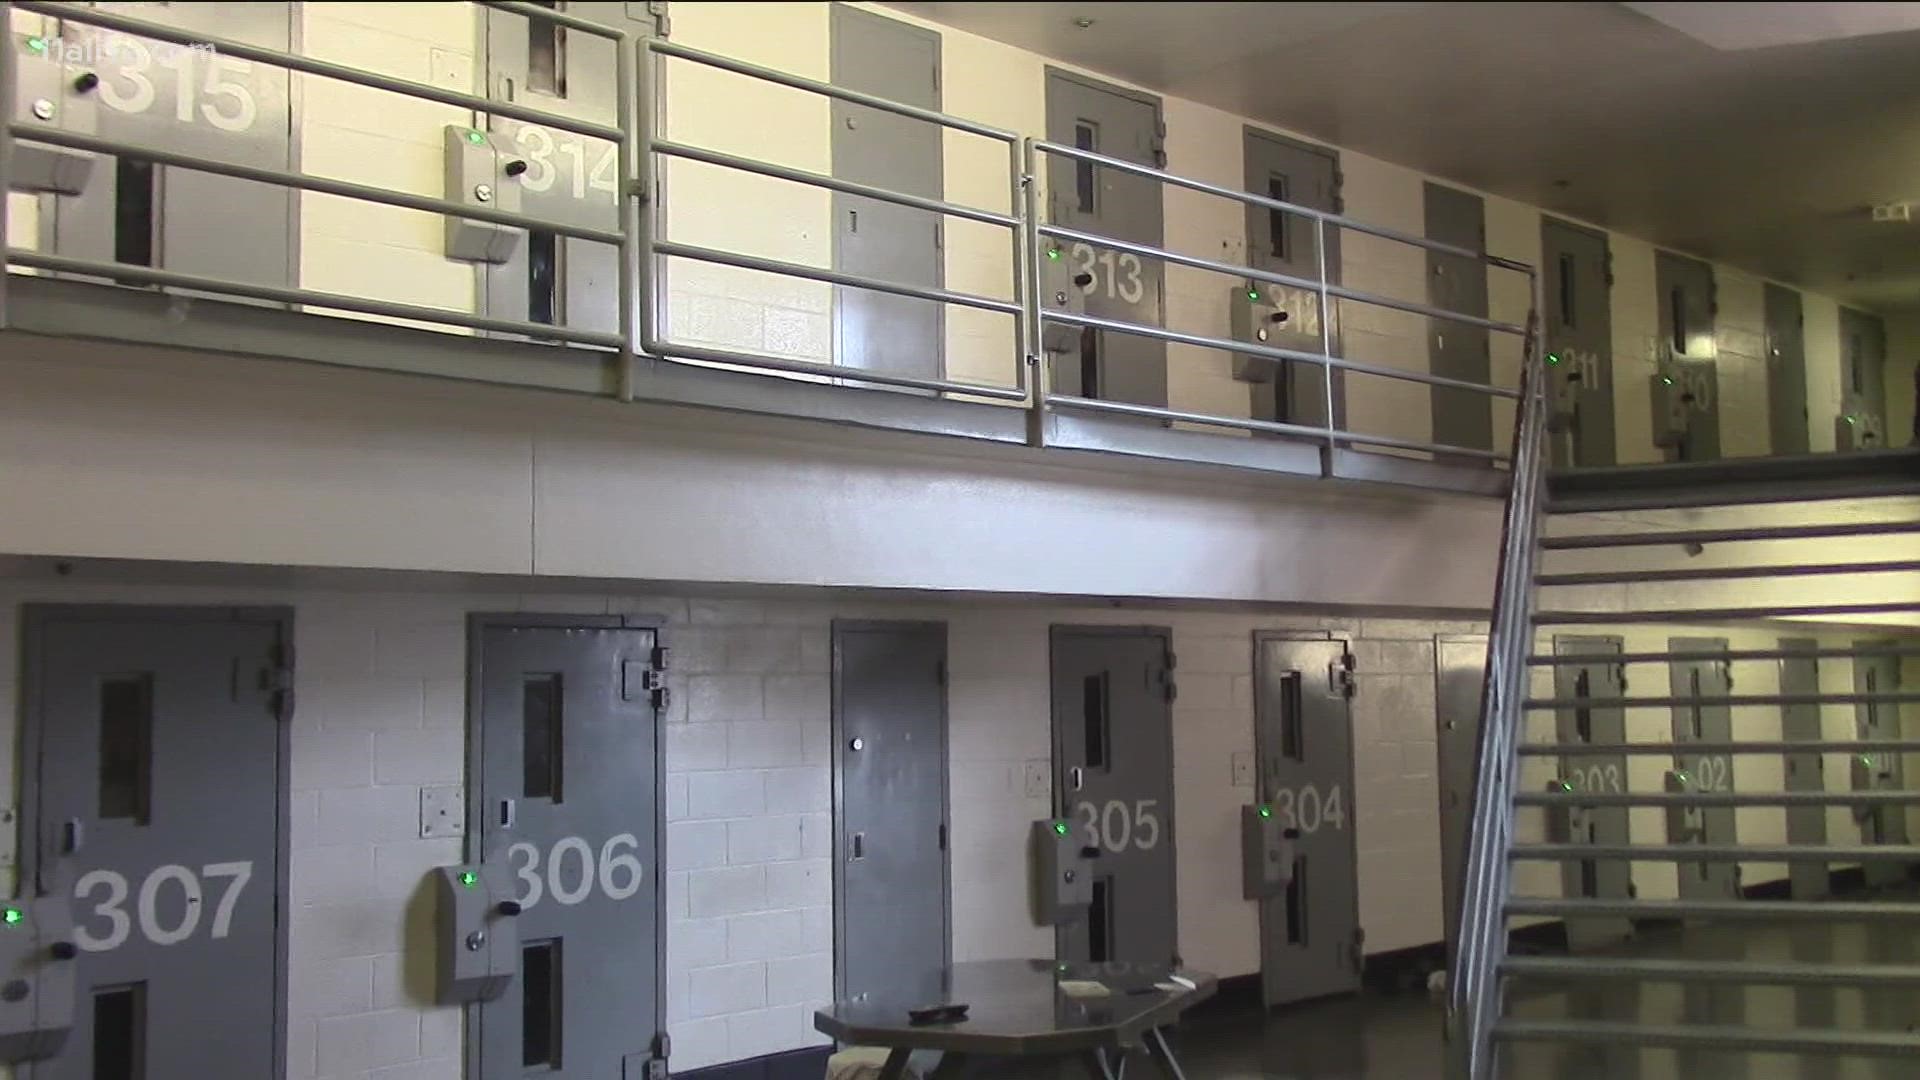 The renewed push comes after the sheriff gave commissioners tours of the jail in February.